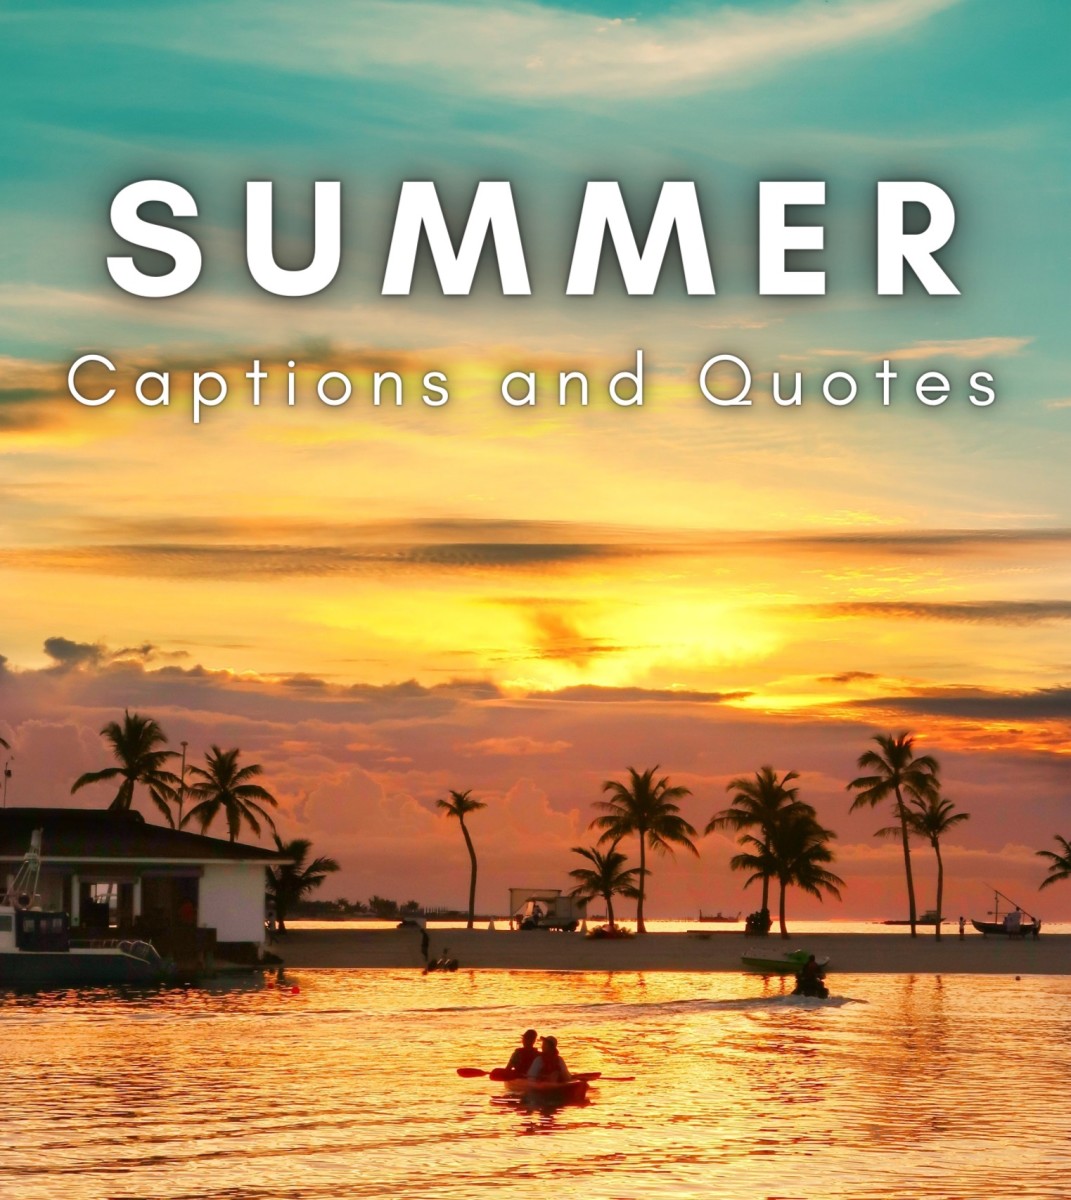 Summer Captions and Quotes